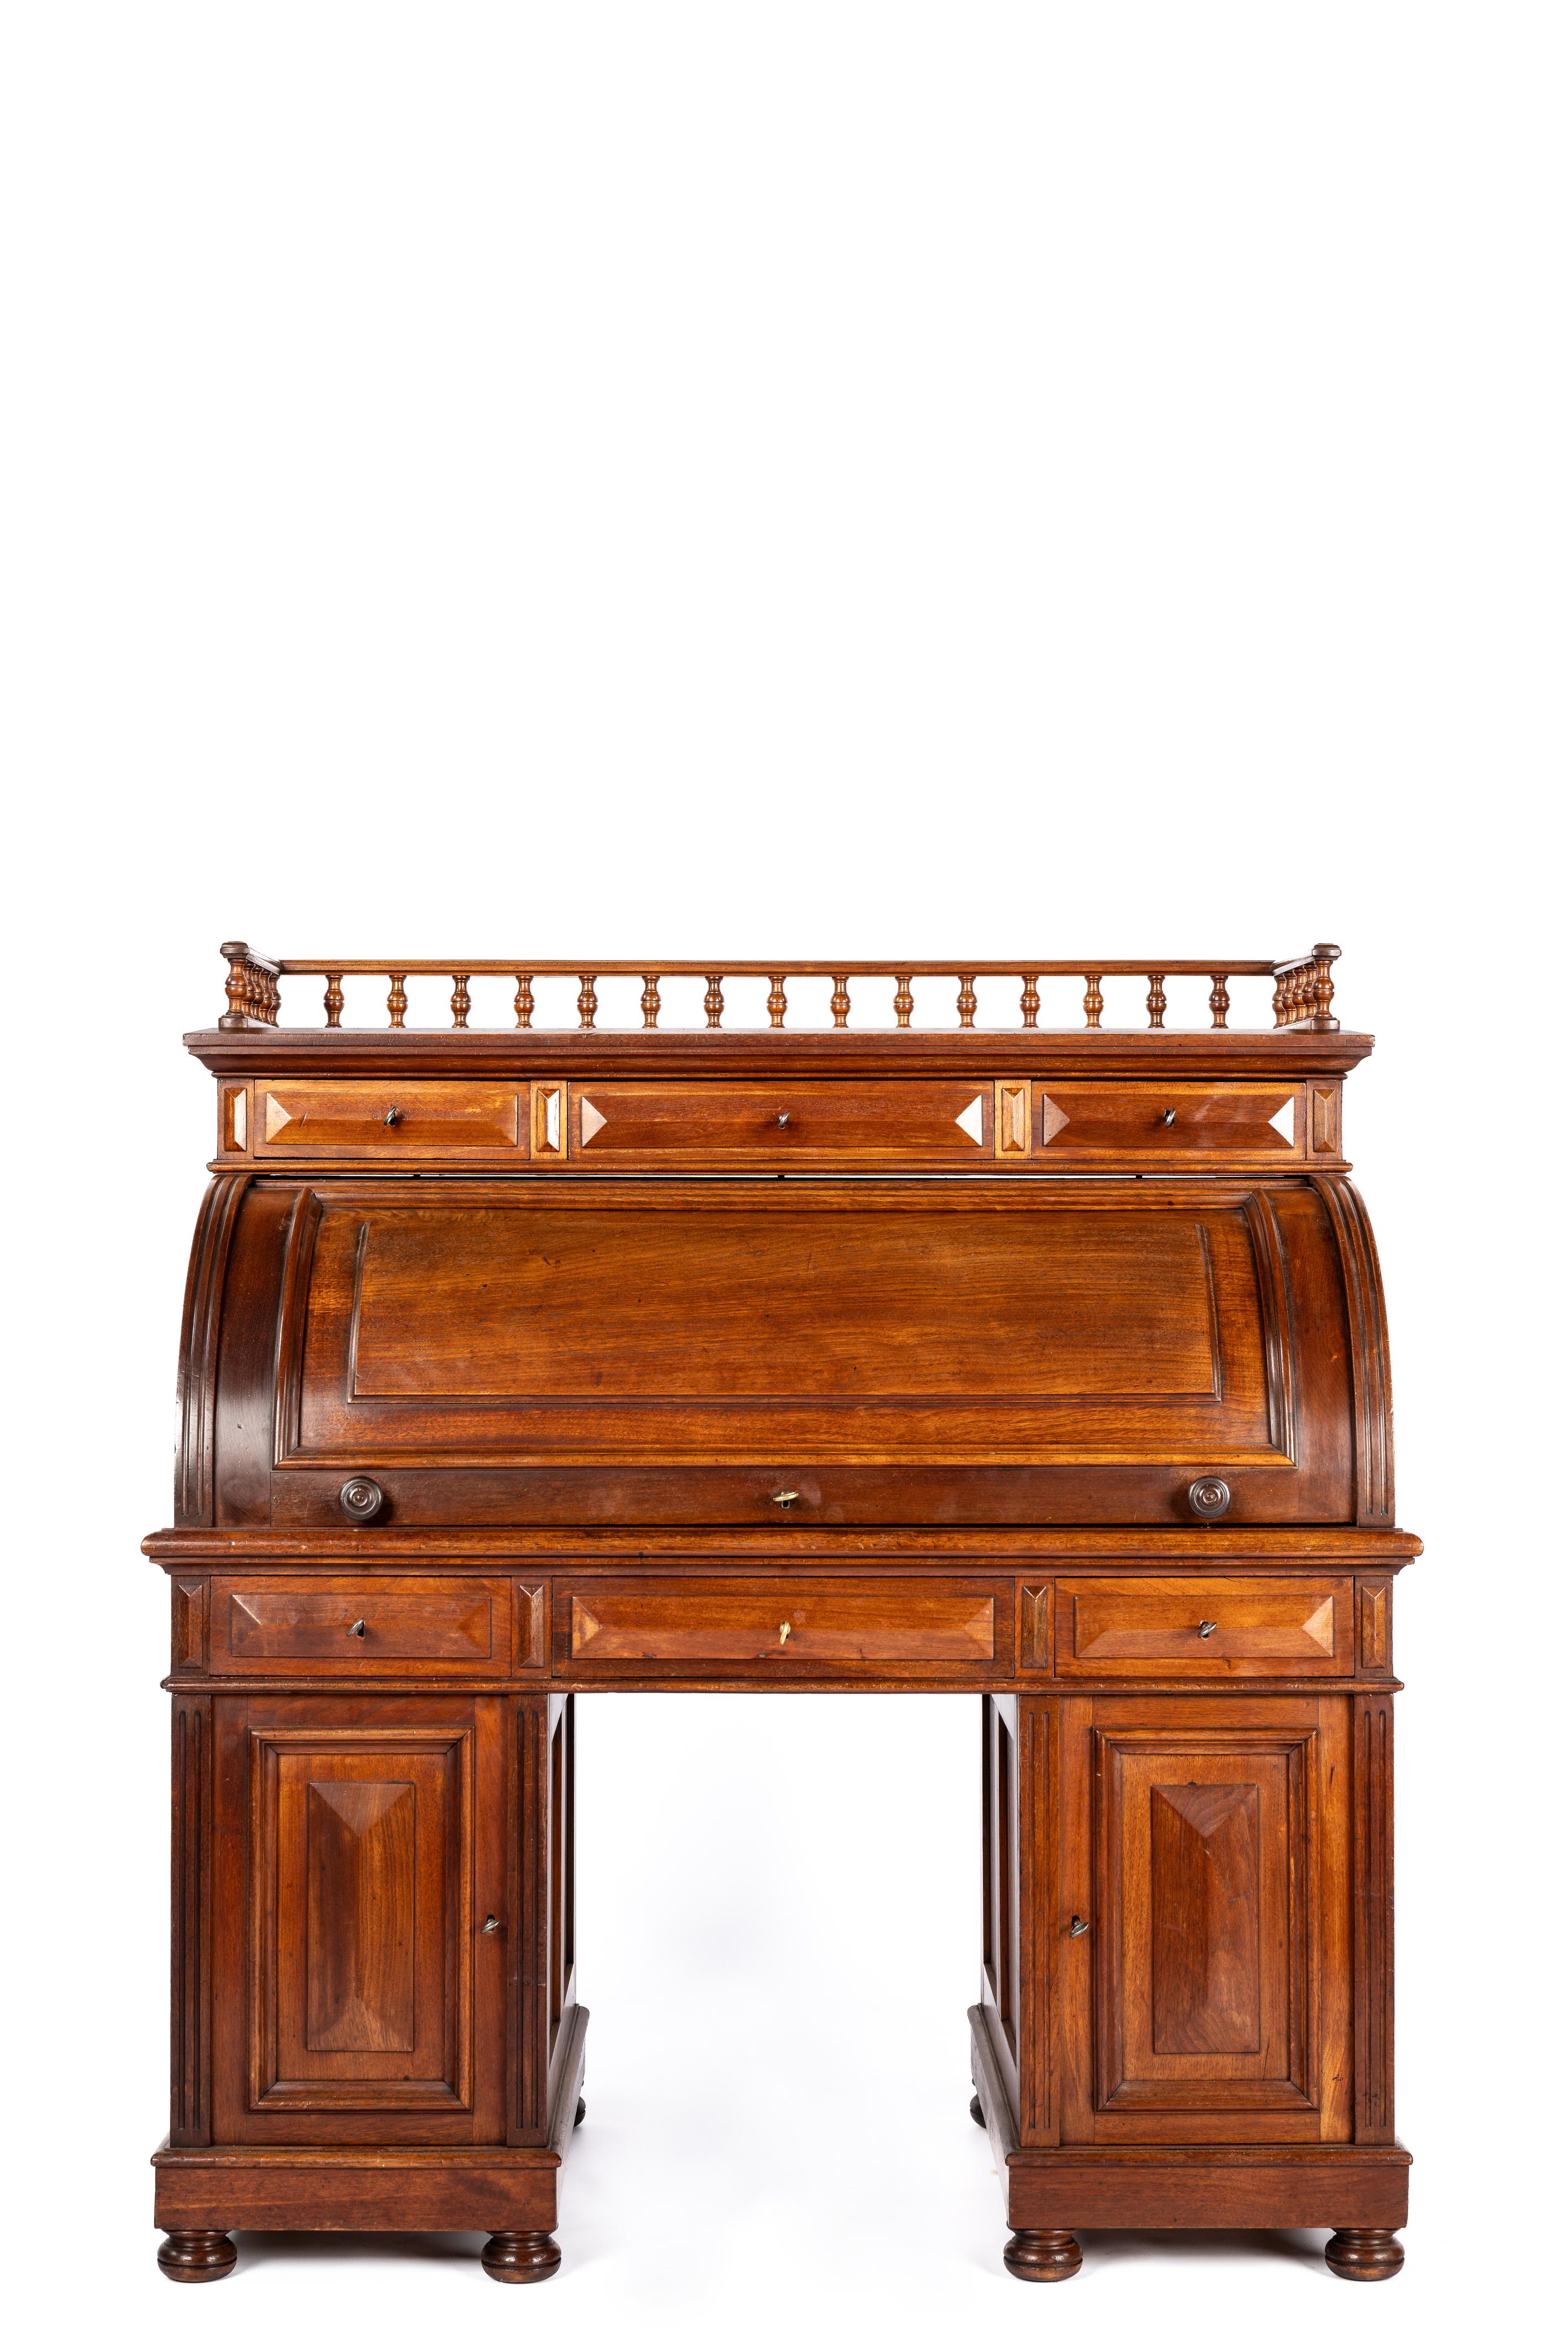 Presented here is a magnificent antique cylinder desk crafted in the heart of the Netherlands during the mid-19th century, around 1850. This meticulously constructed desk was fashioned from the finest available materials, boasting a timeless and